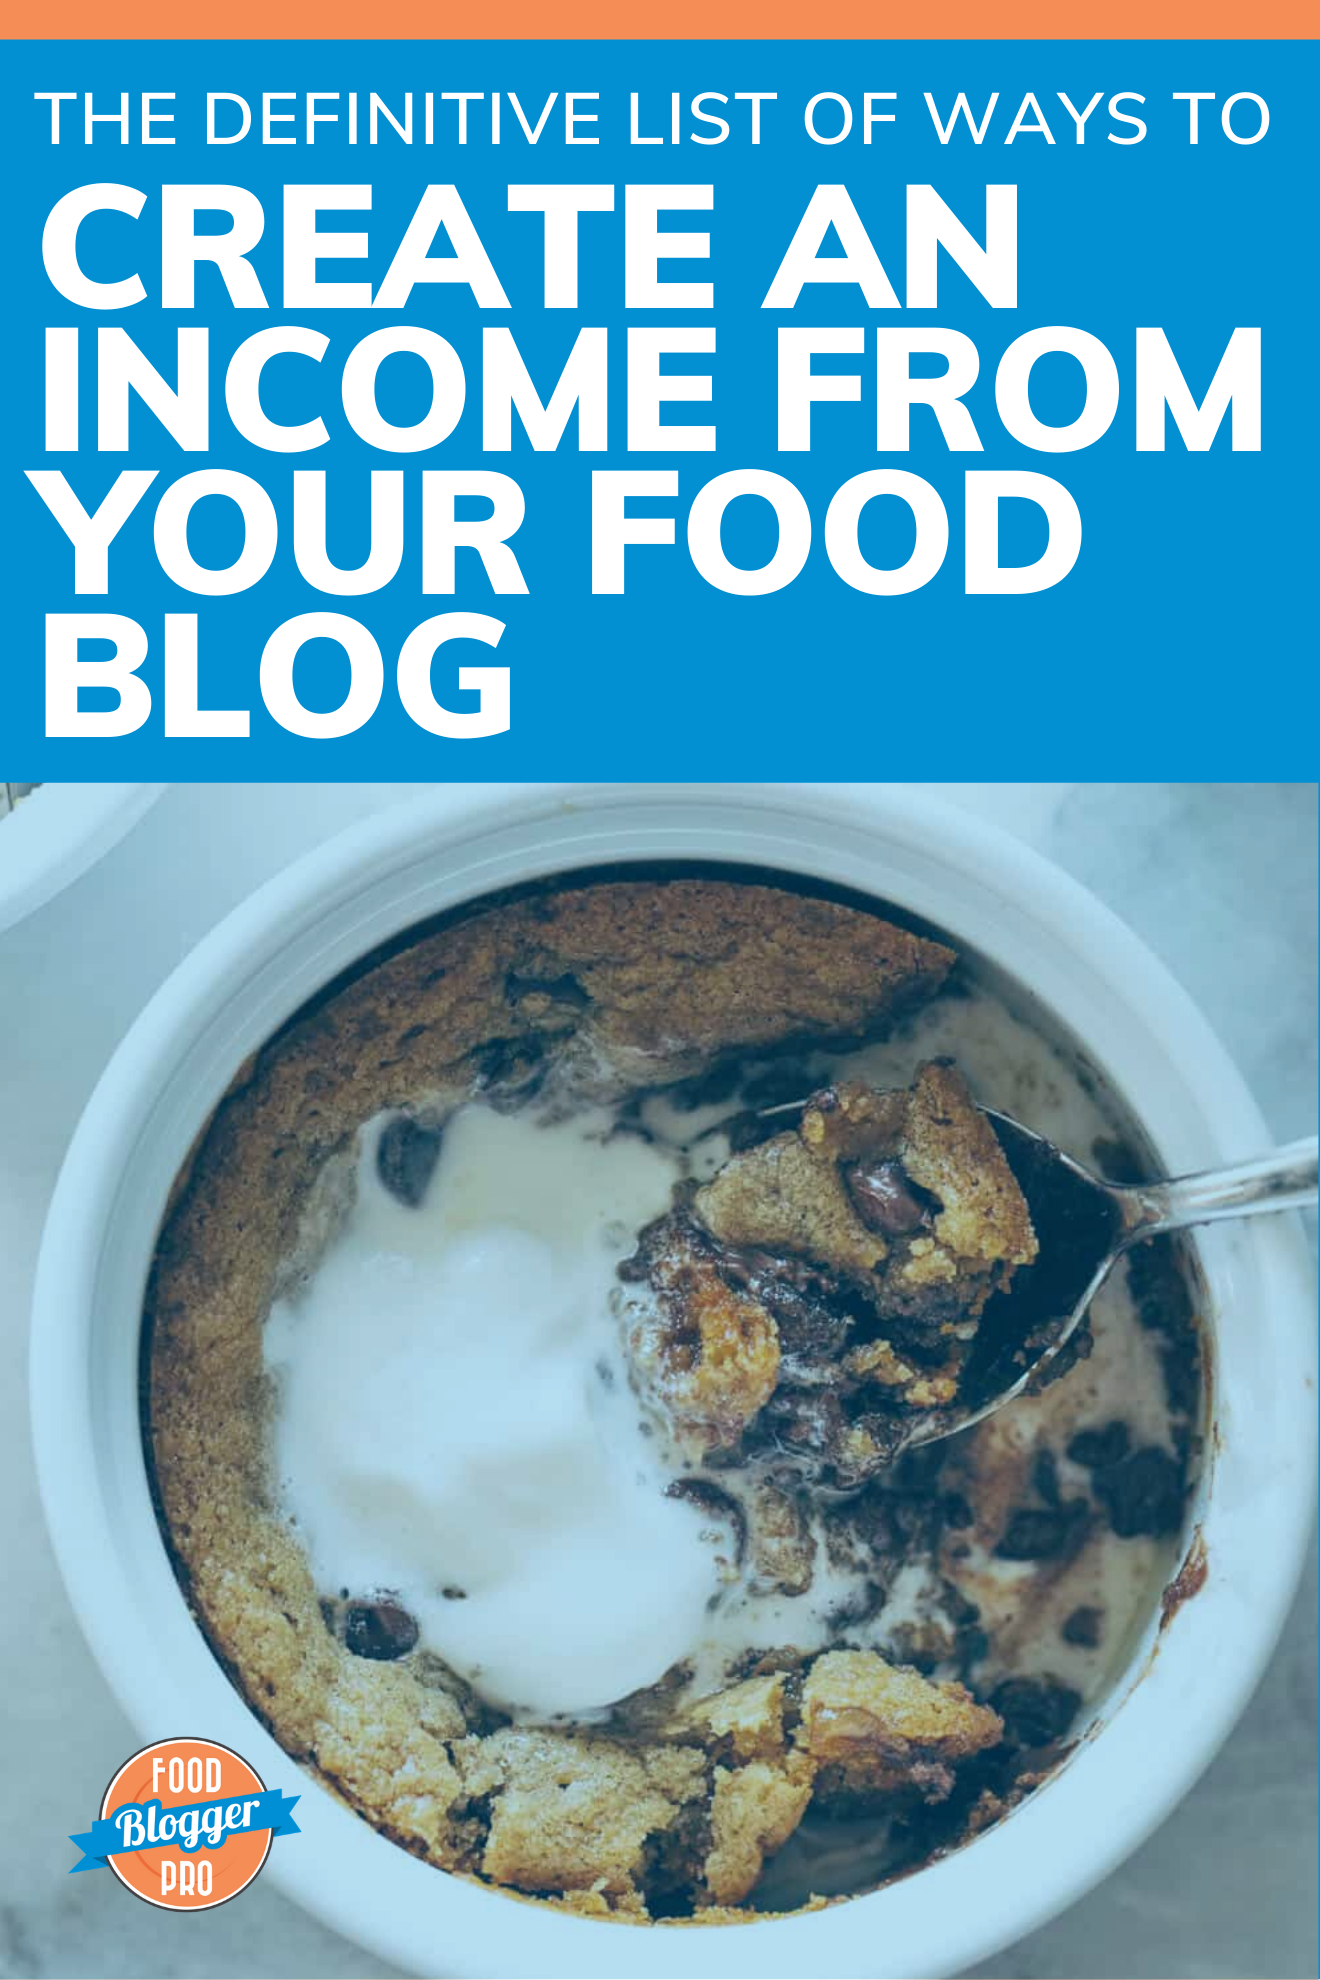 The title of this article, 'The definitive list of ways to create an income from your food blog' with a picture of a cookie in a bowl